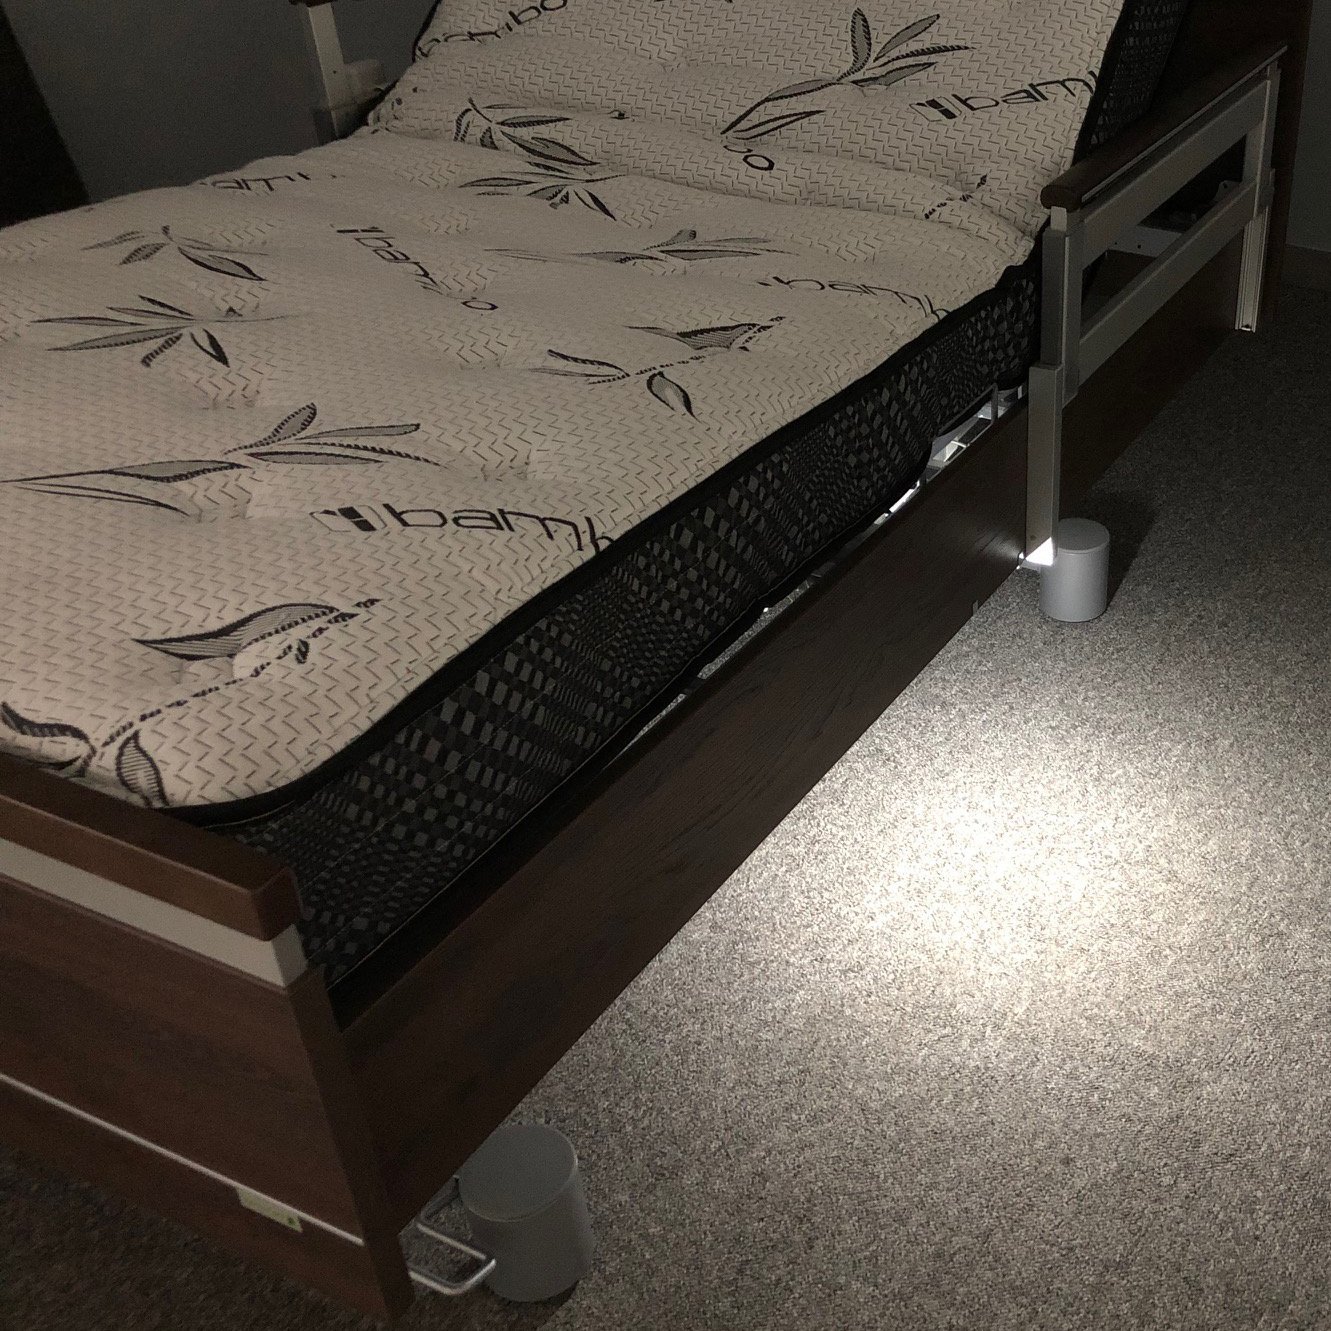 Heavy Duty Bariatric Hospital Beds For Sale - Several to Choose From